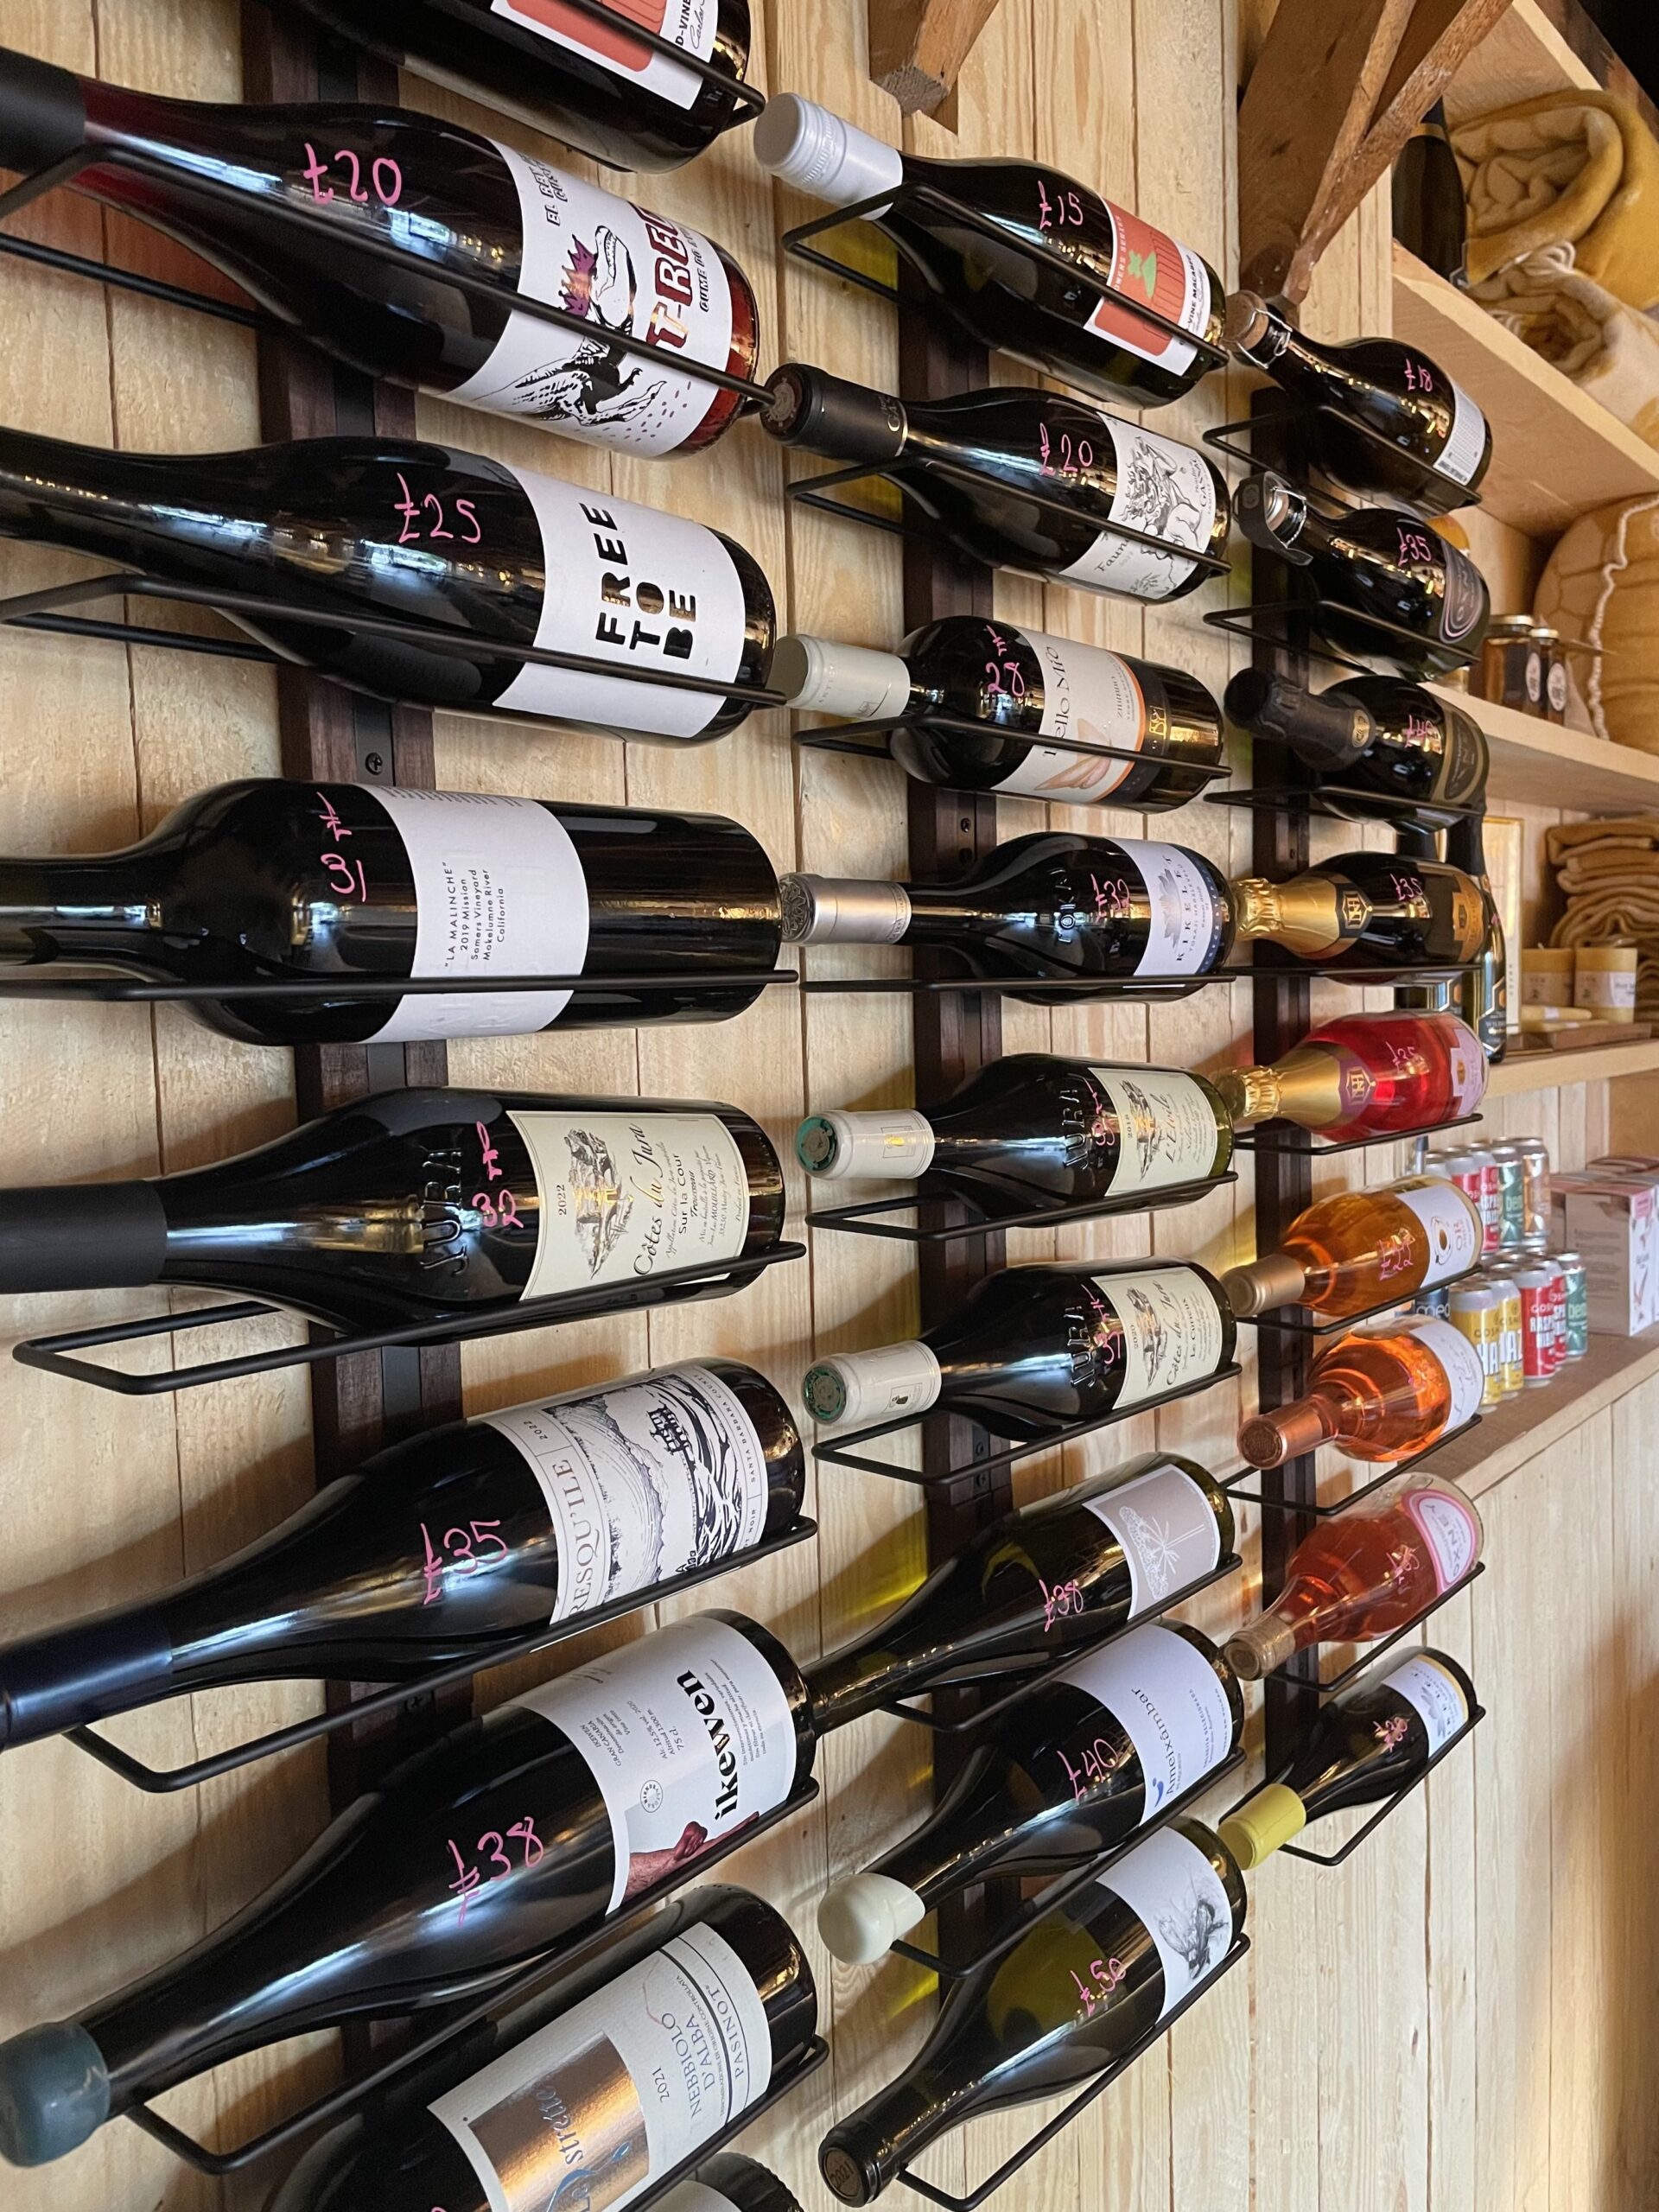 The Wine Retail Shelf at Apiary Cafe & Bar.